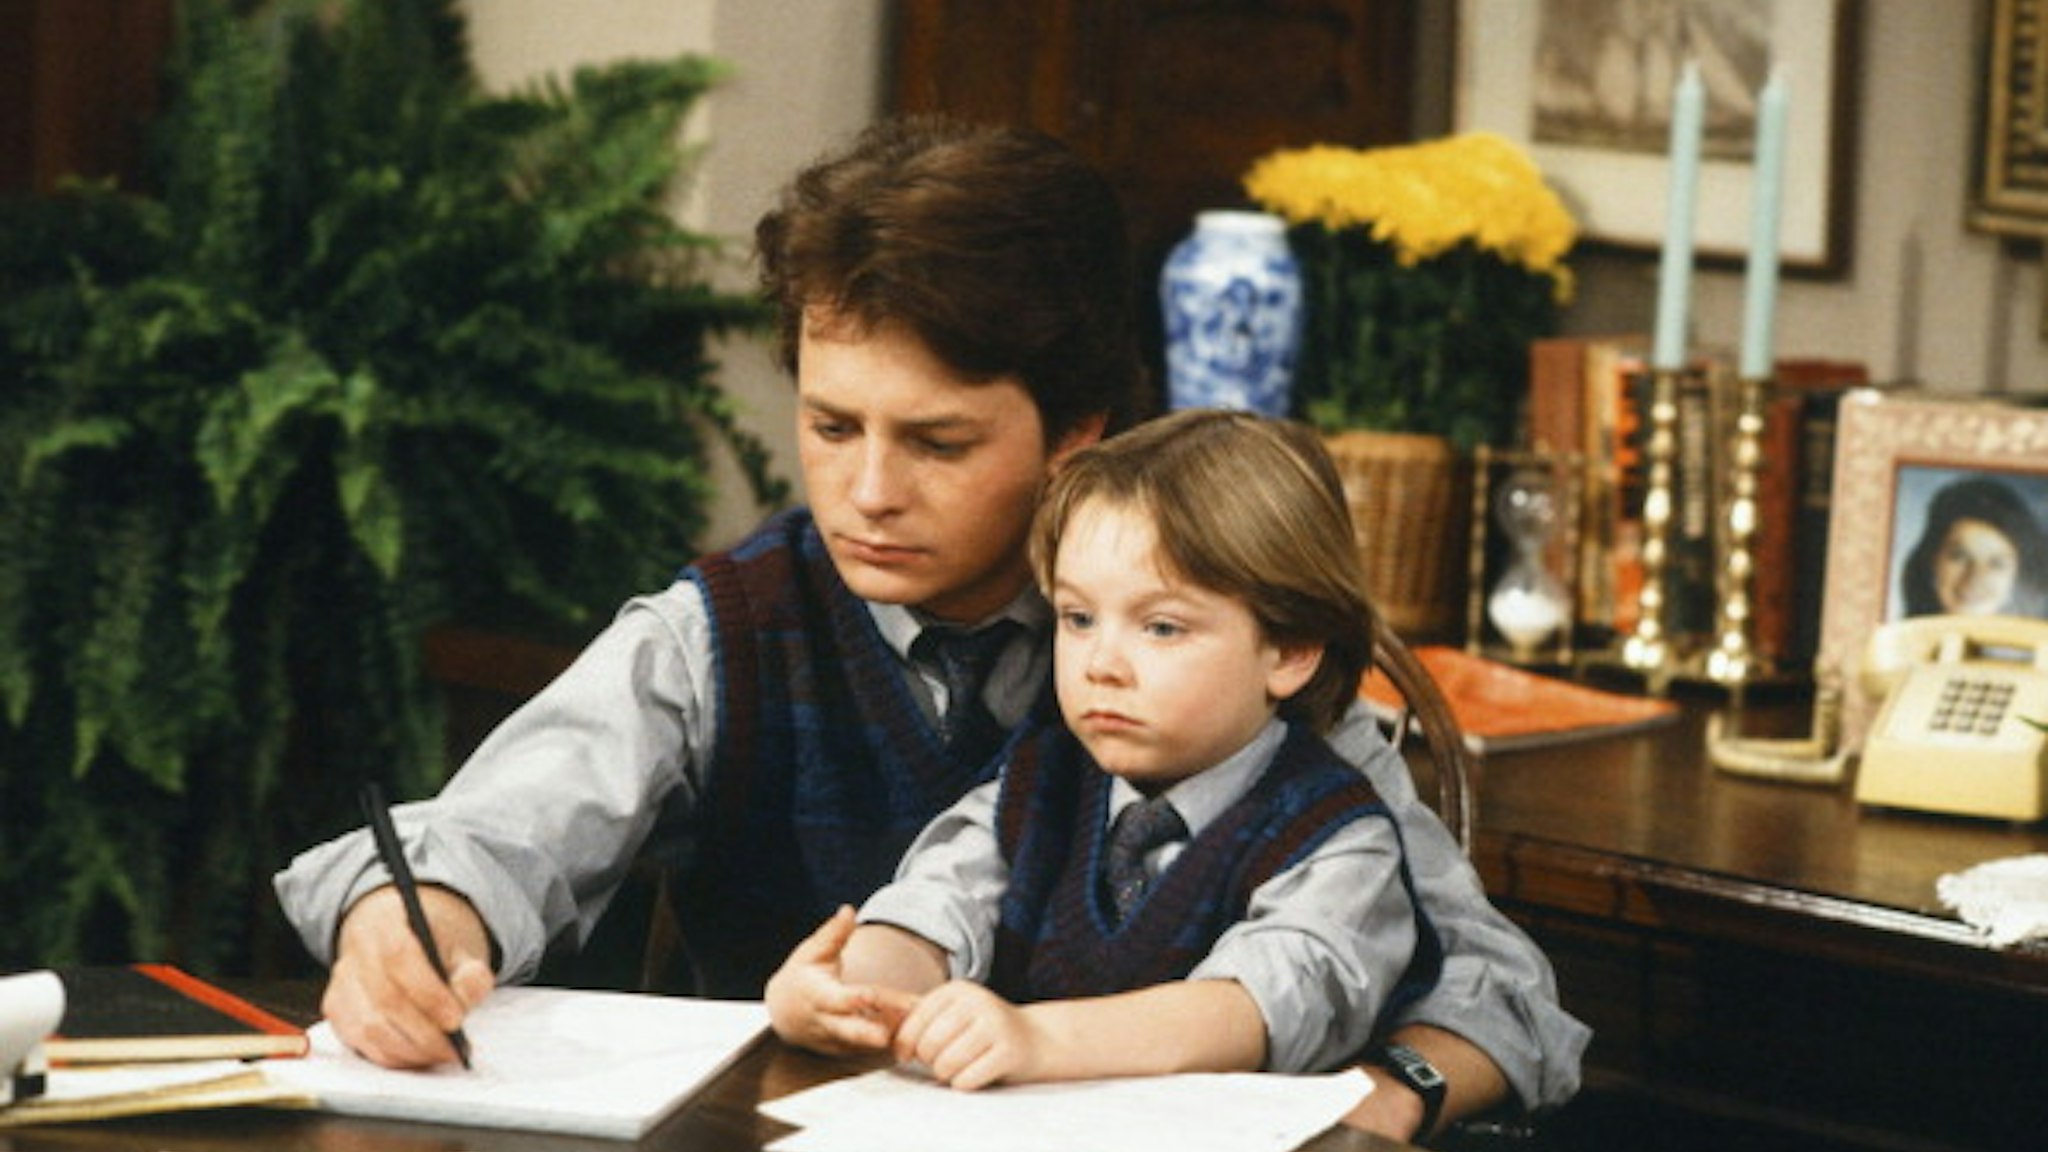 FAMILY TIES -- "'D' is for Date" Episode 25 -- Pictured: (l-r) Michael J. Fox as Alex P. Keaton, Brian Bonsall as Andrew 'Andy' Keaton